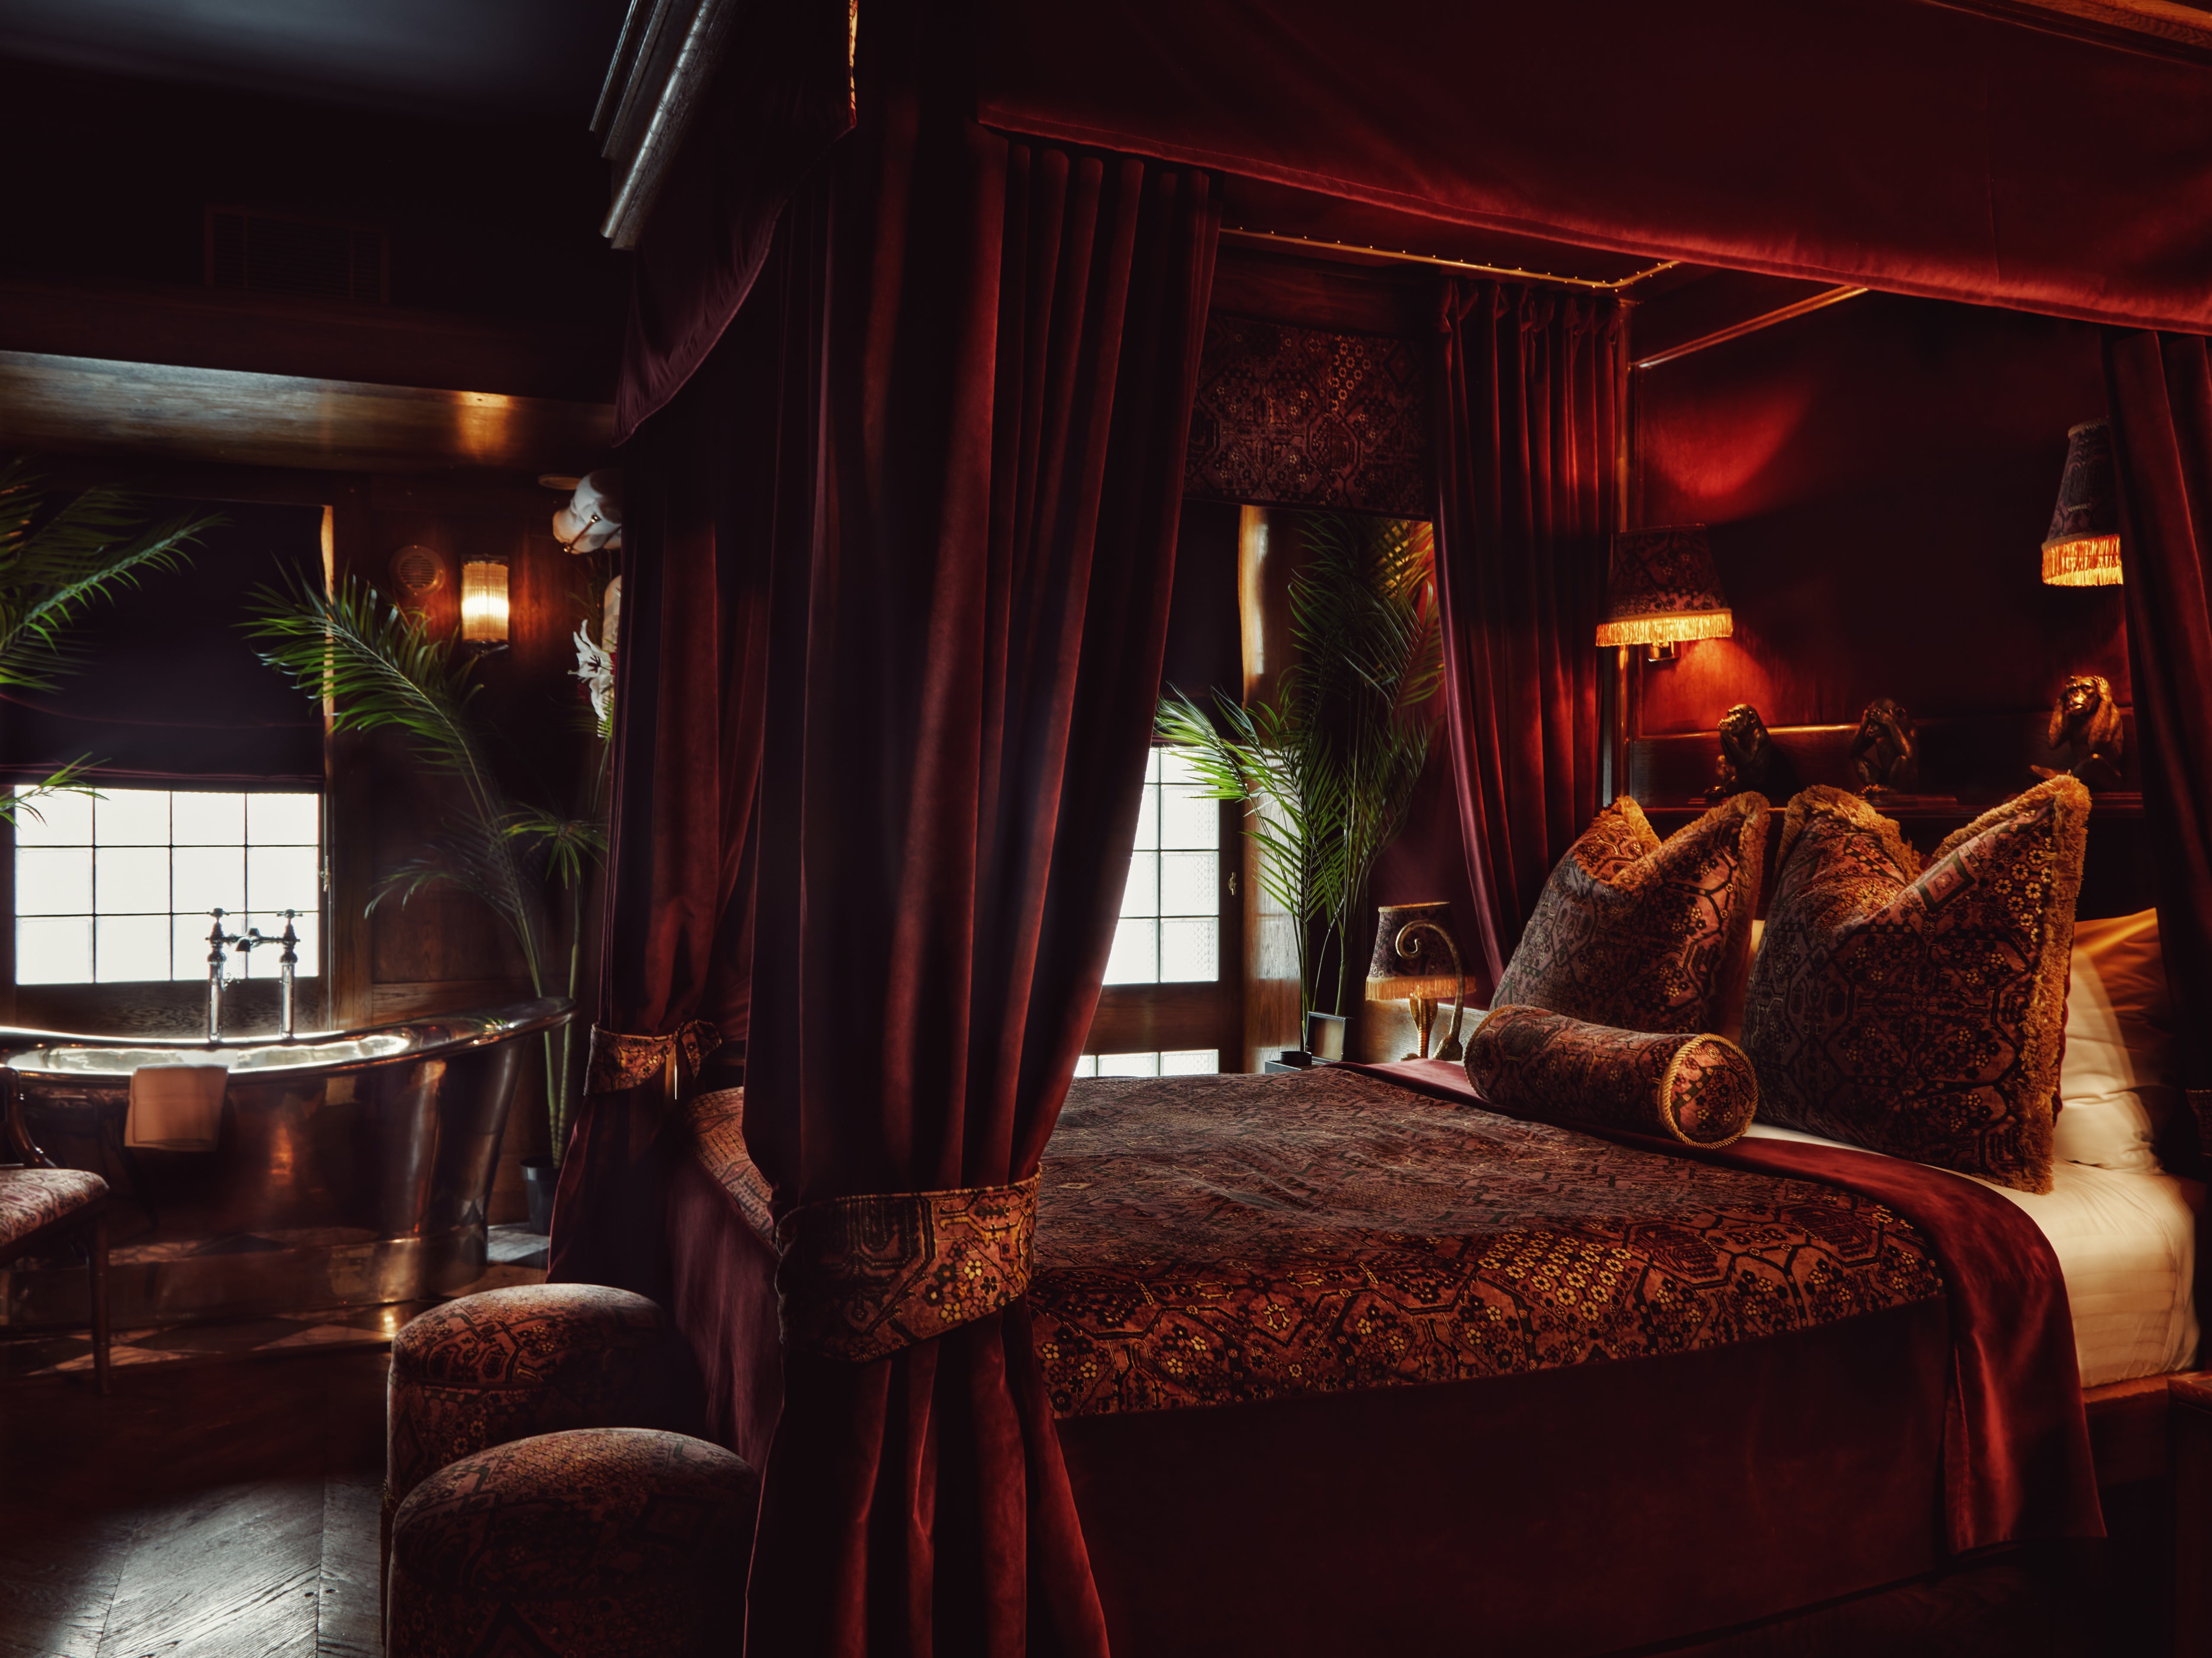 Fancy a decadent night away? House of Gods might be just the thing